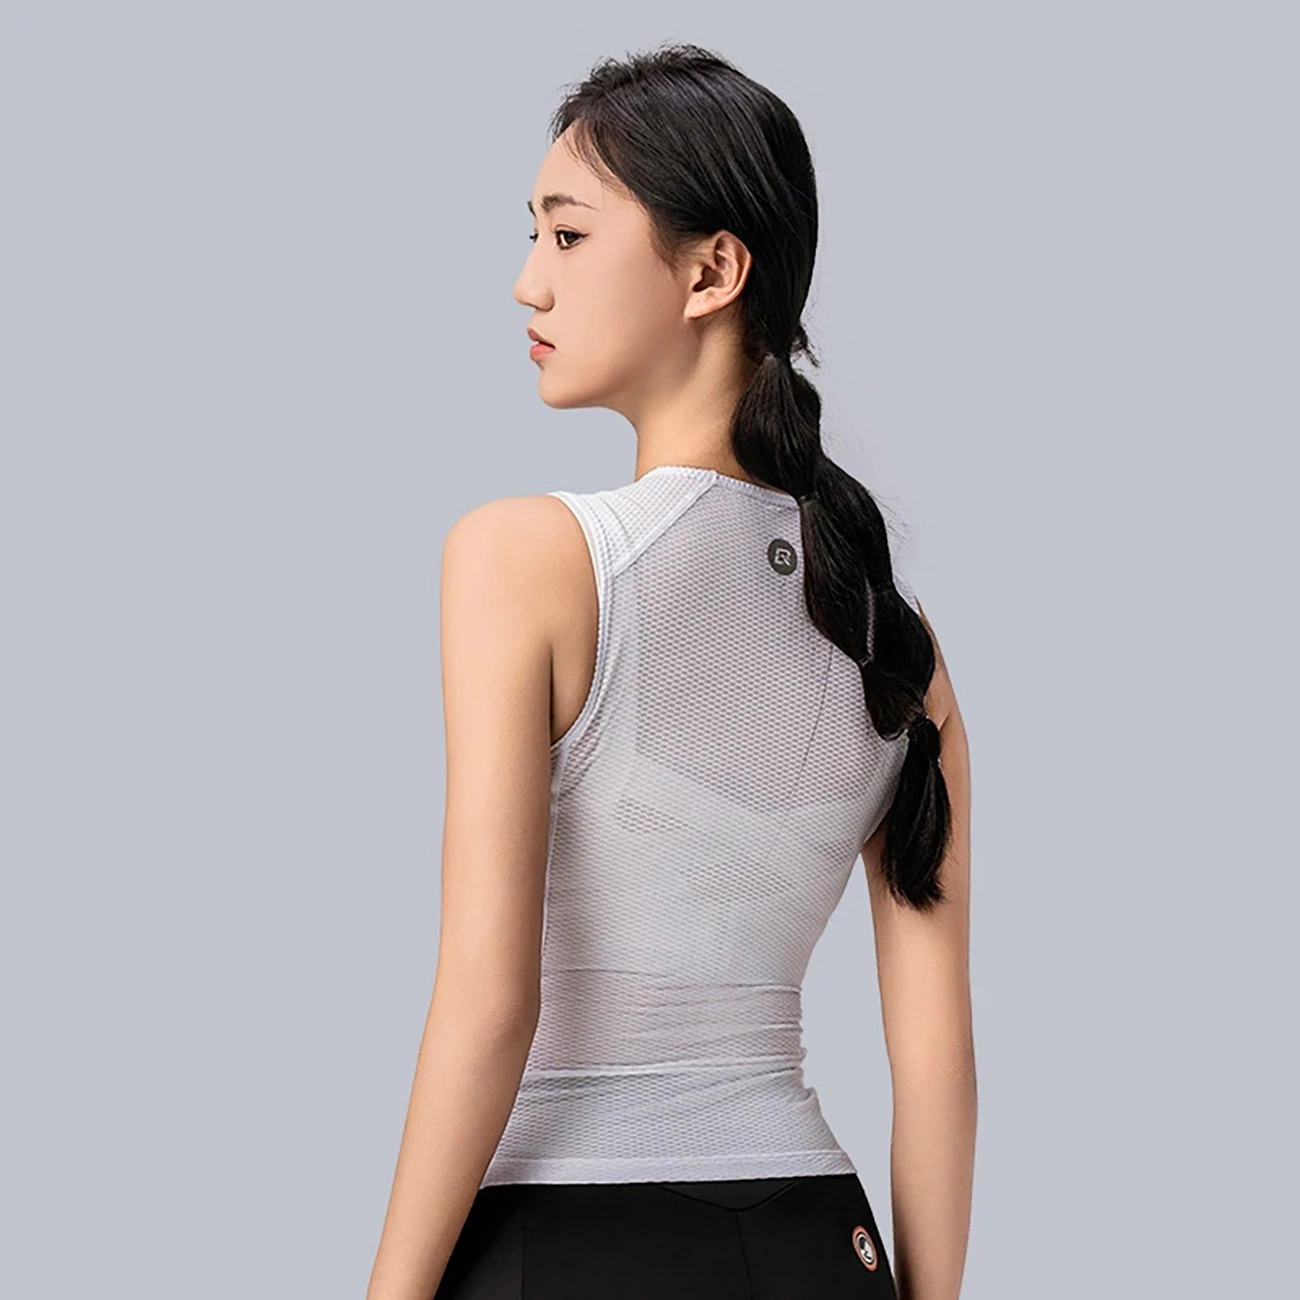 Woman wearing Rockbros YDBX001 cycling vest standing with her back to the camera